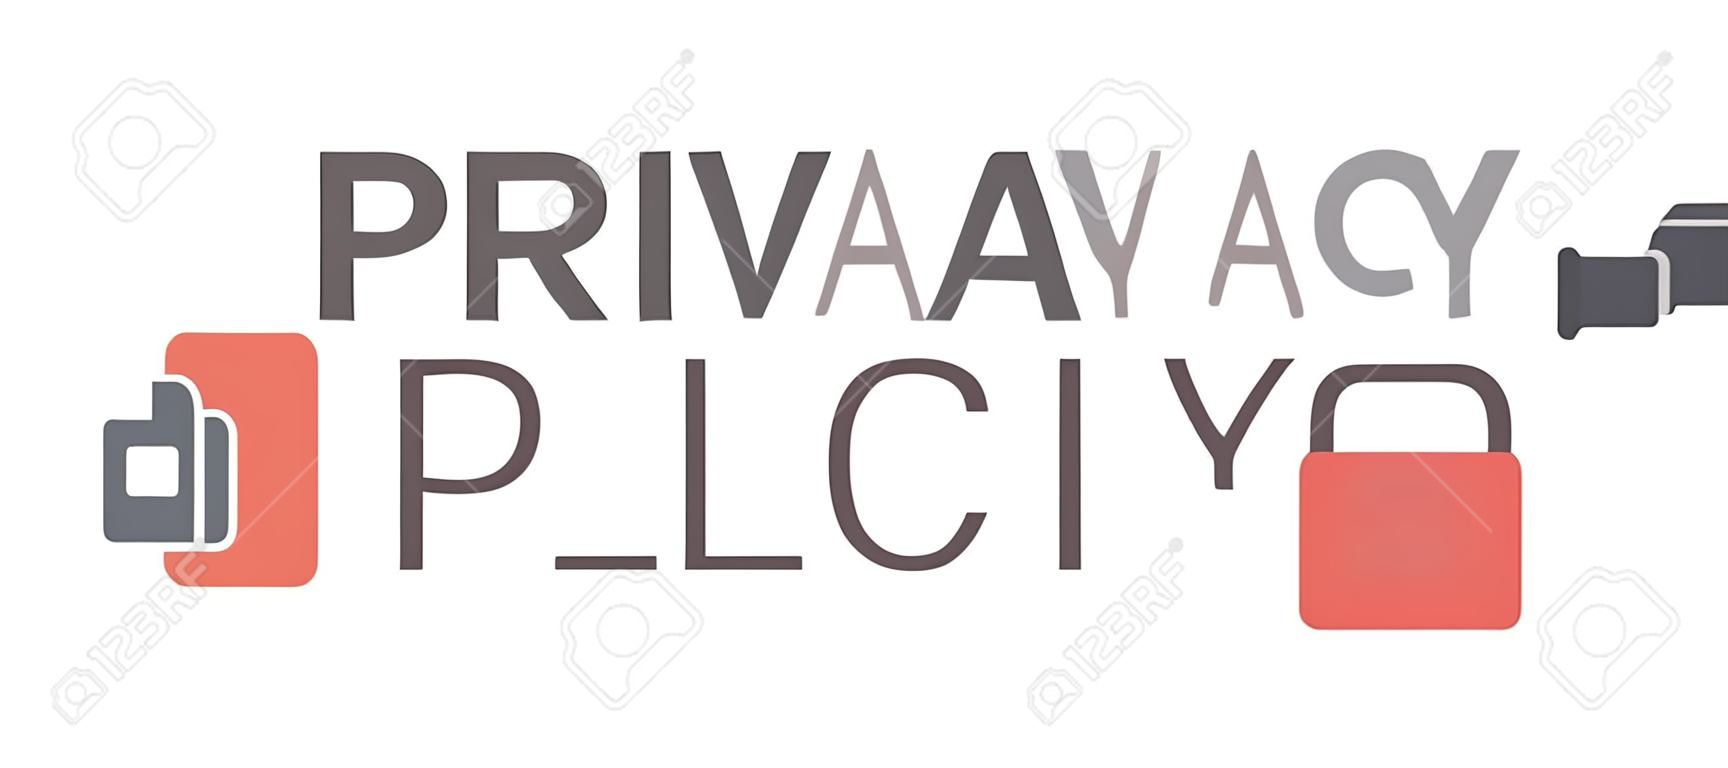 Privacy Policy Banner or Badge for Website